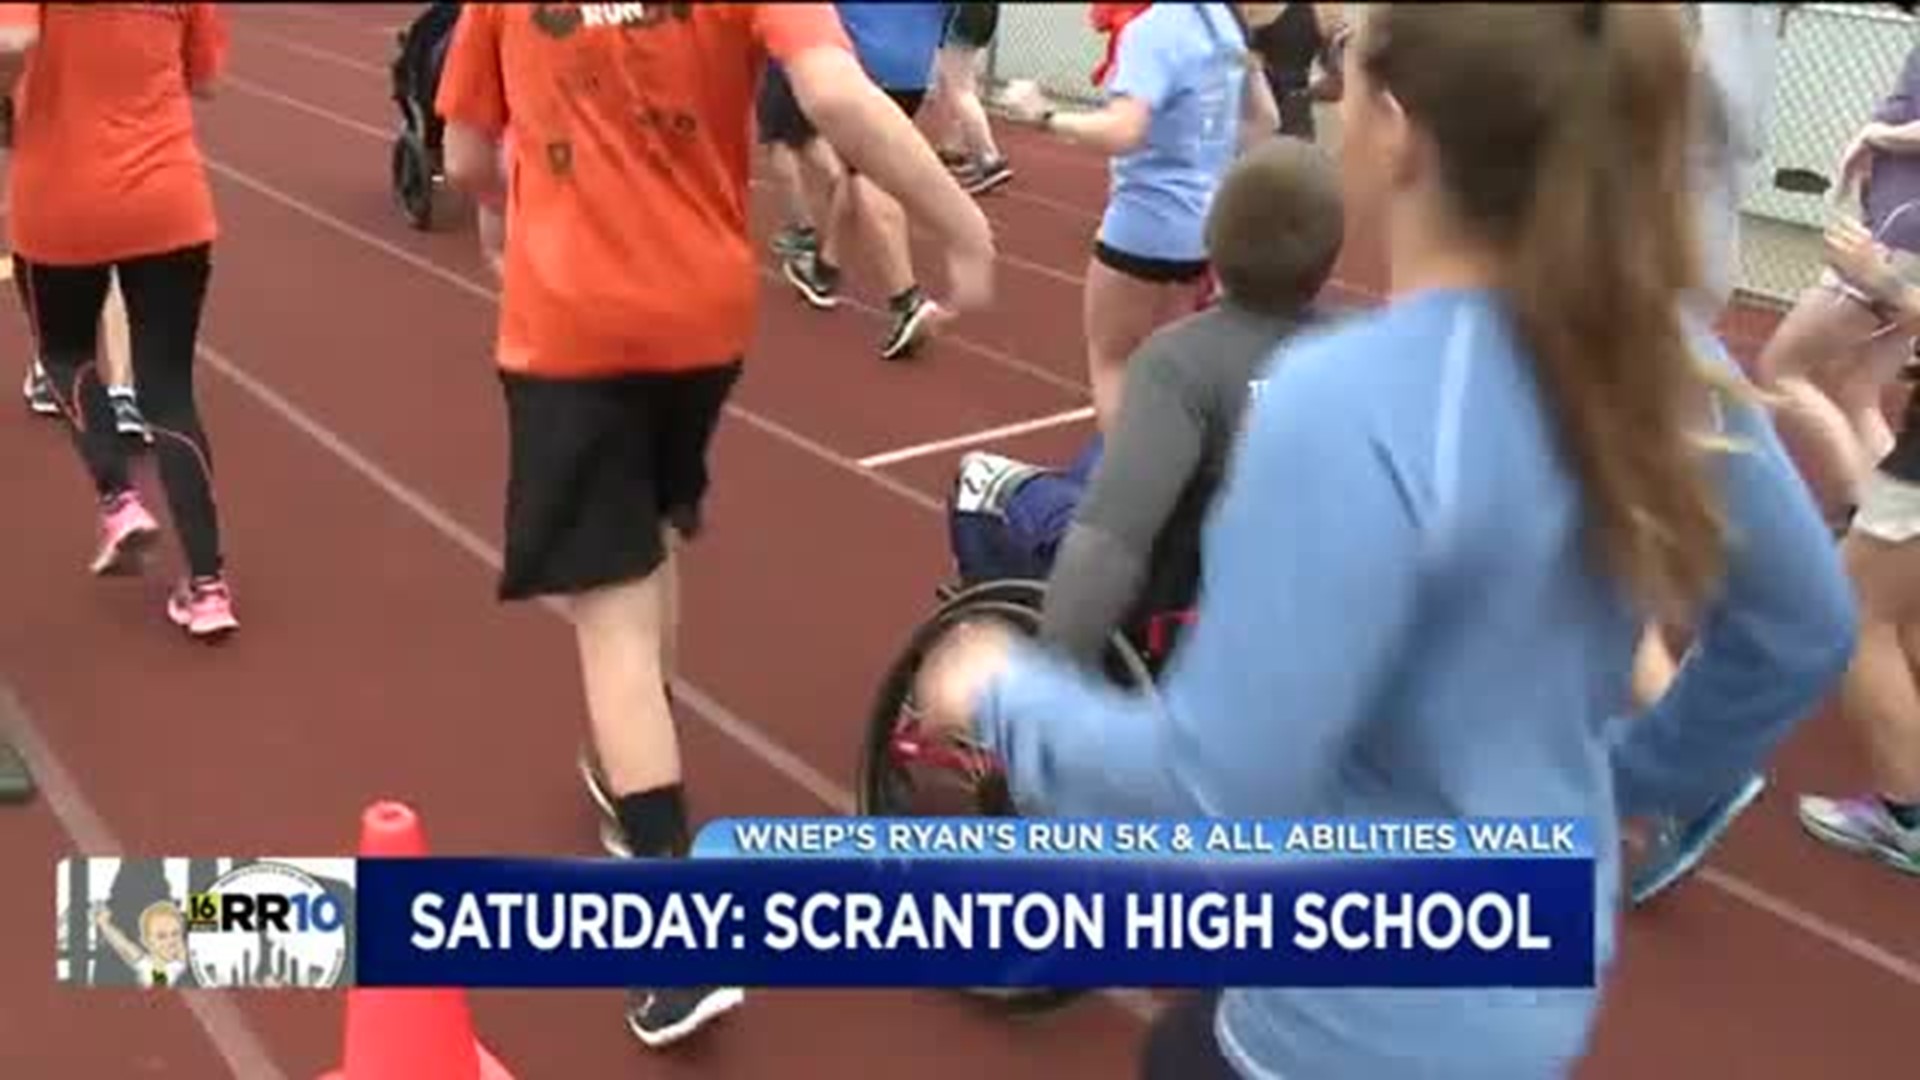 WNEP's Ryan's Run 5K/All Abilities Walk Is This Saturday - Here's How to Get Involved